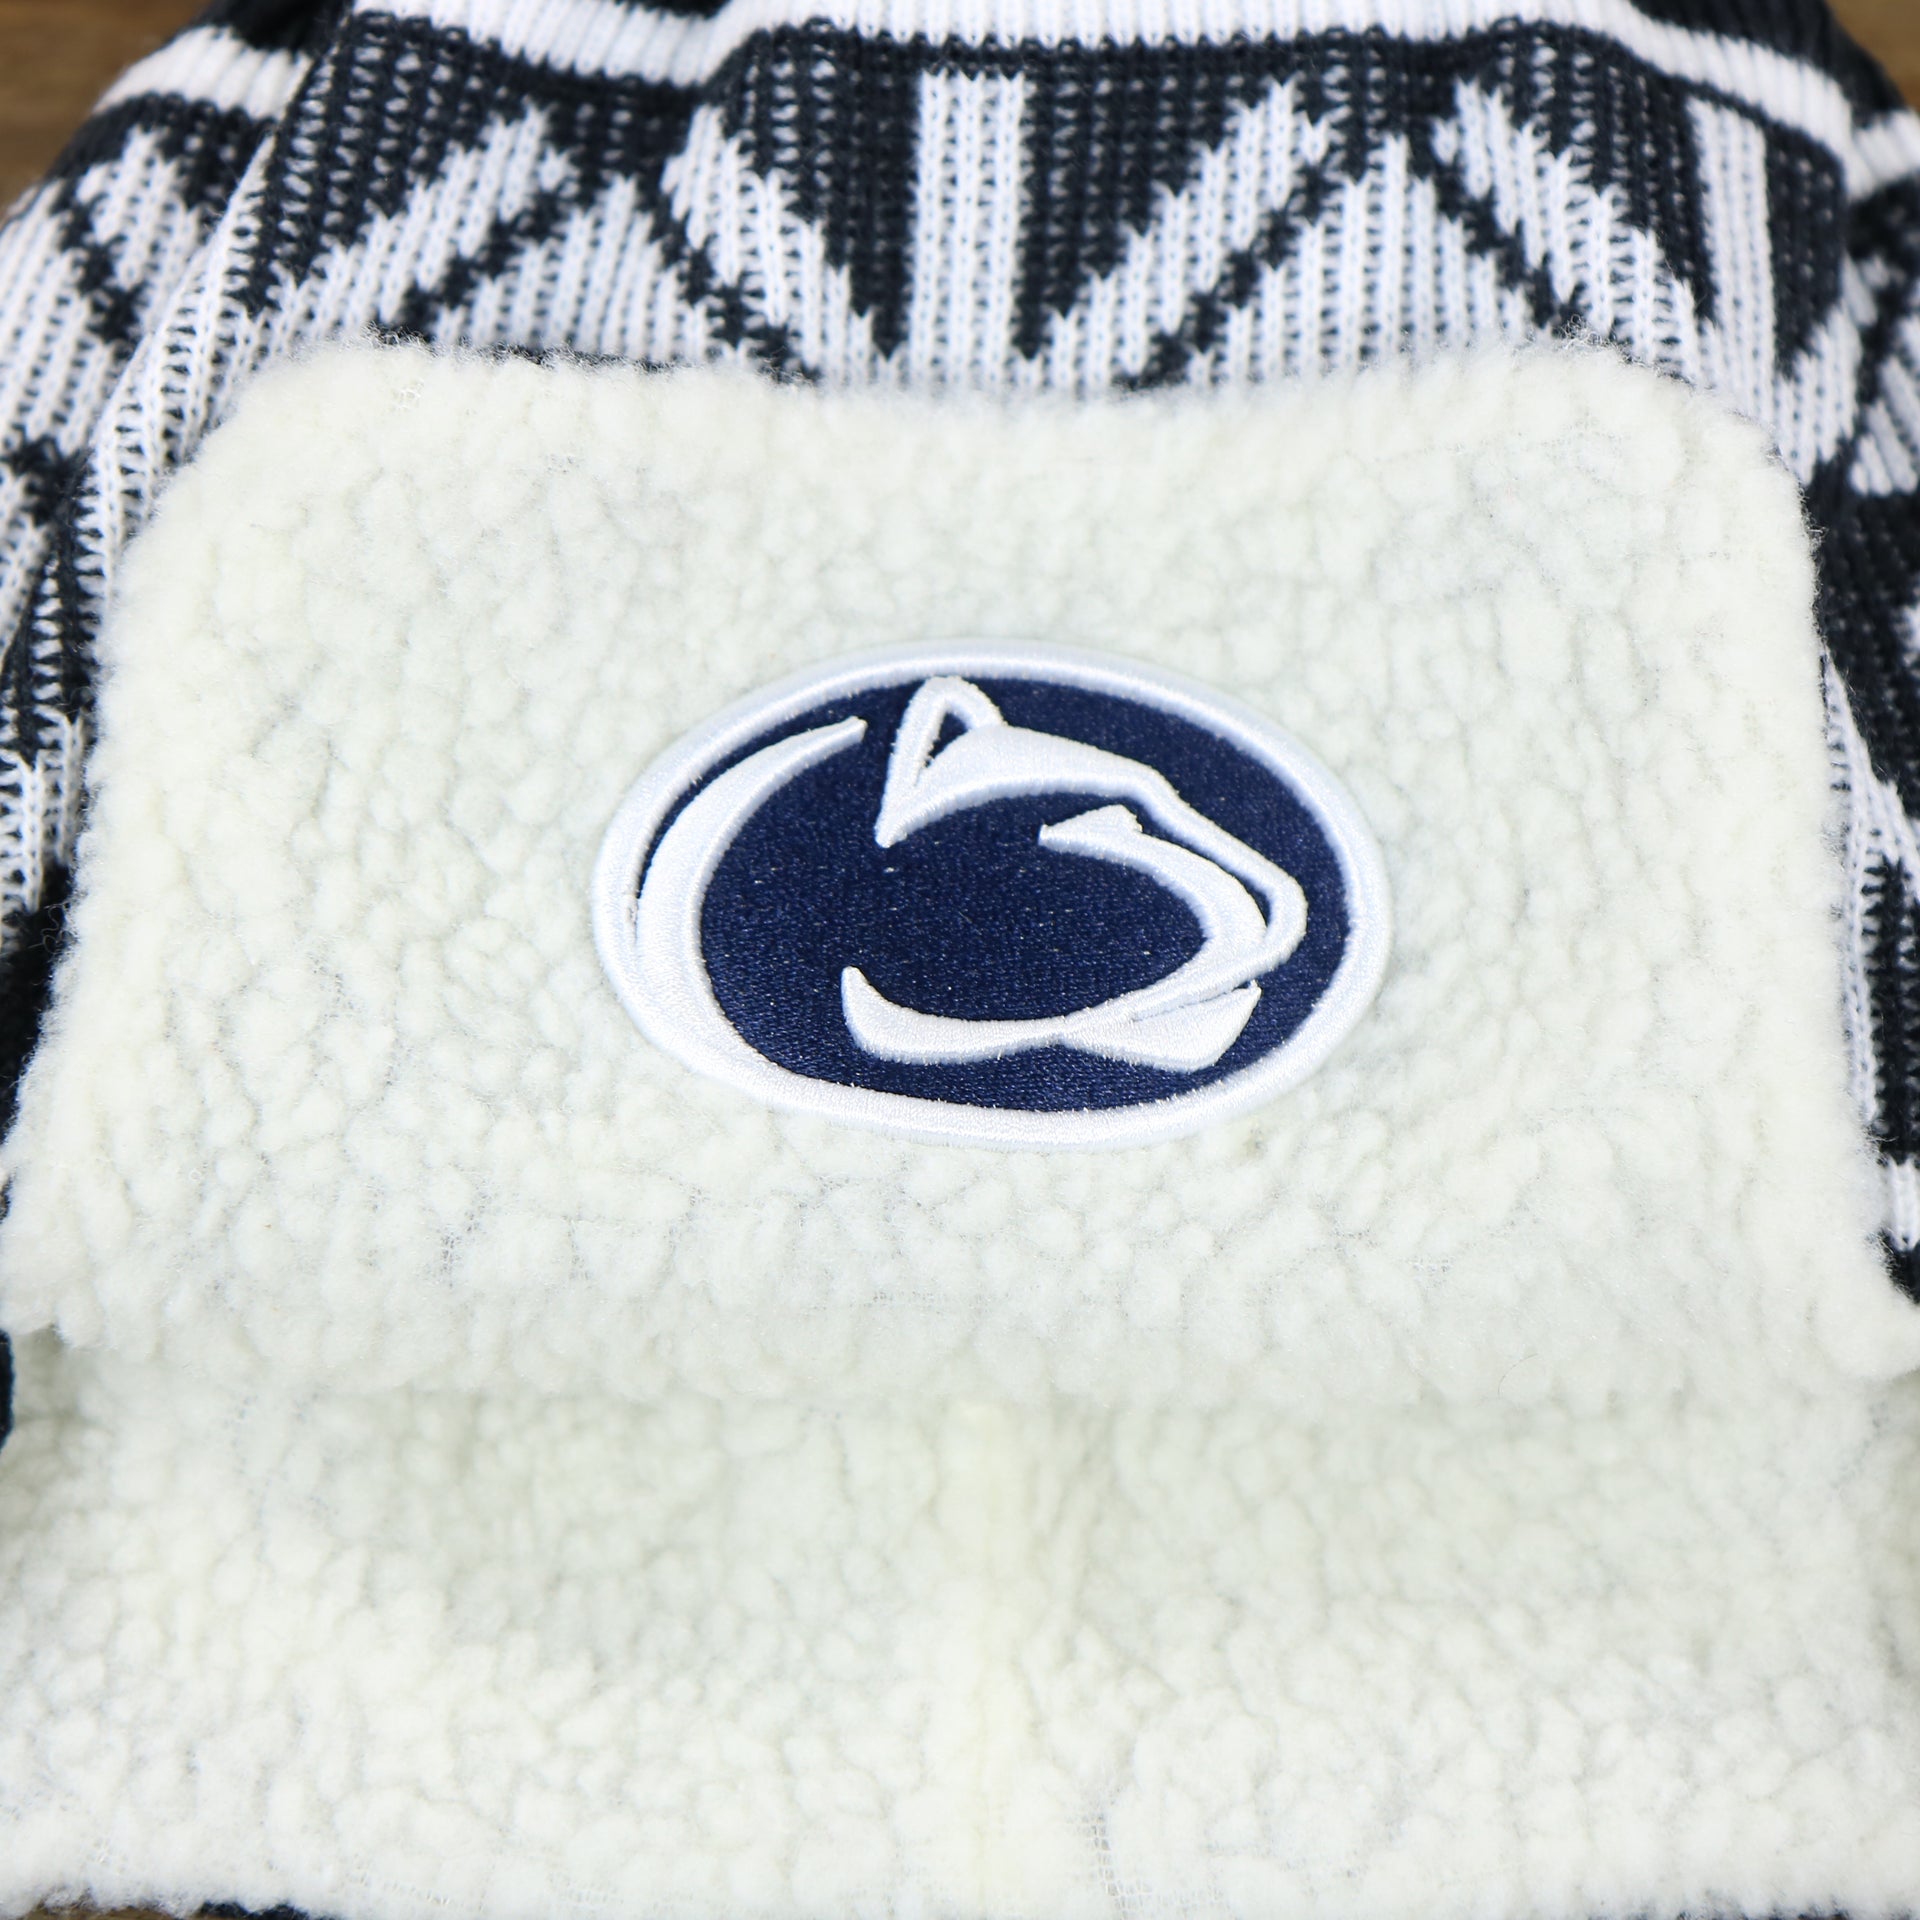 The Nittany Lions Logo on the Penn State Nittany Lions Winter Print Trapper Hat | Navy Blue Trapper Hat